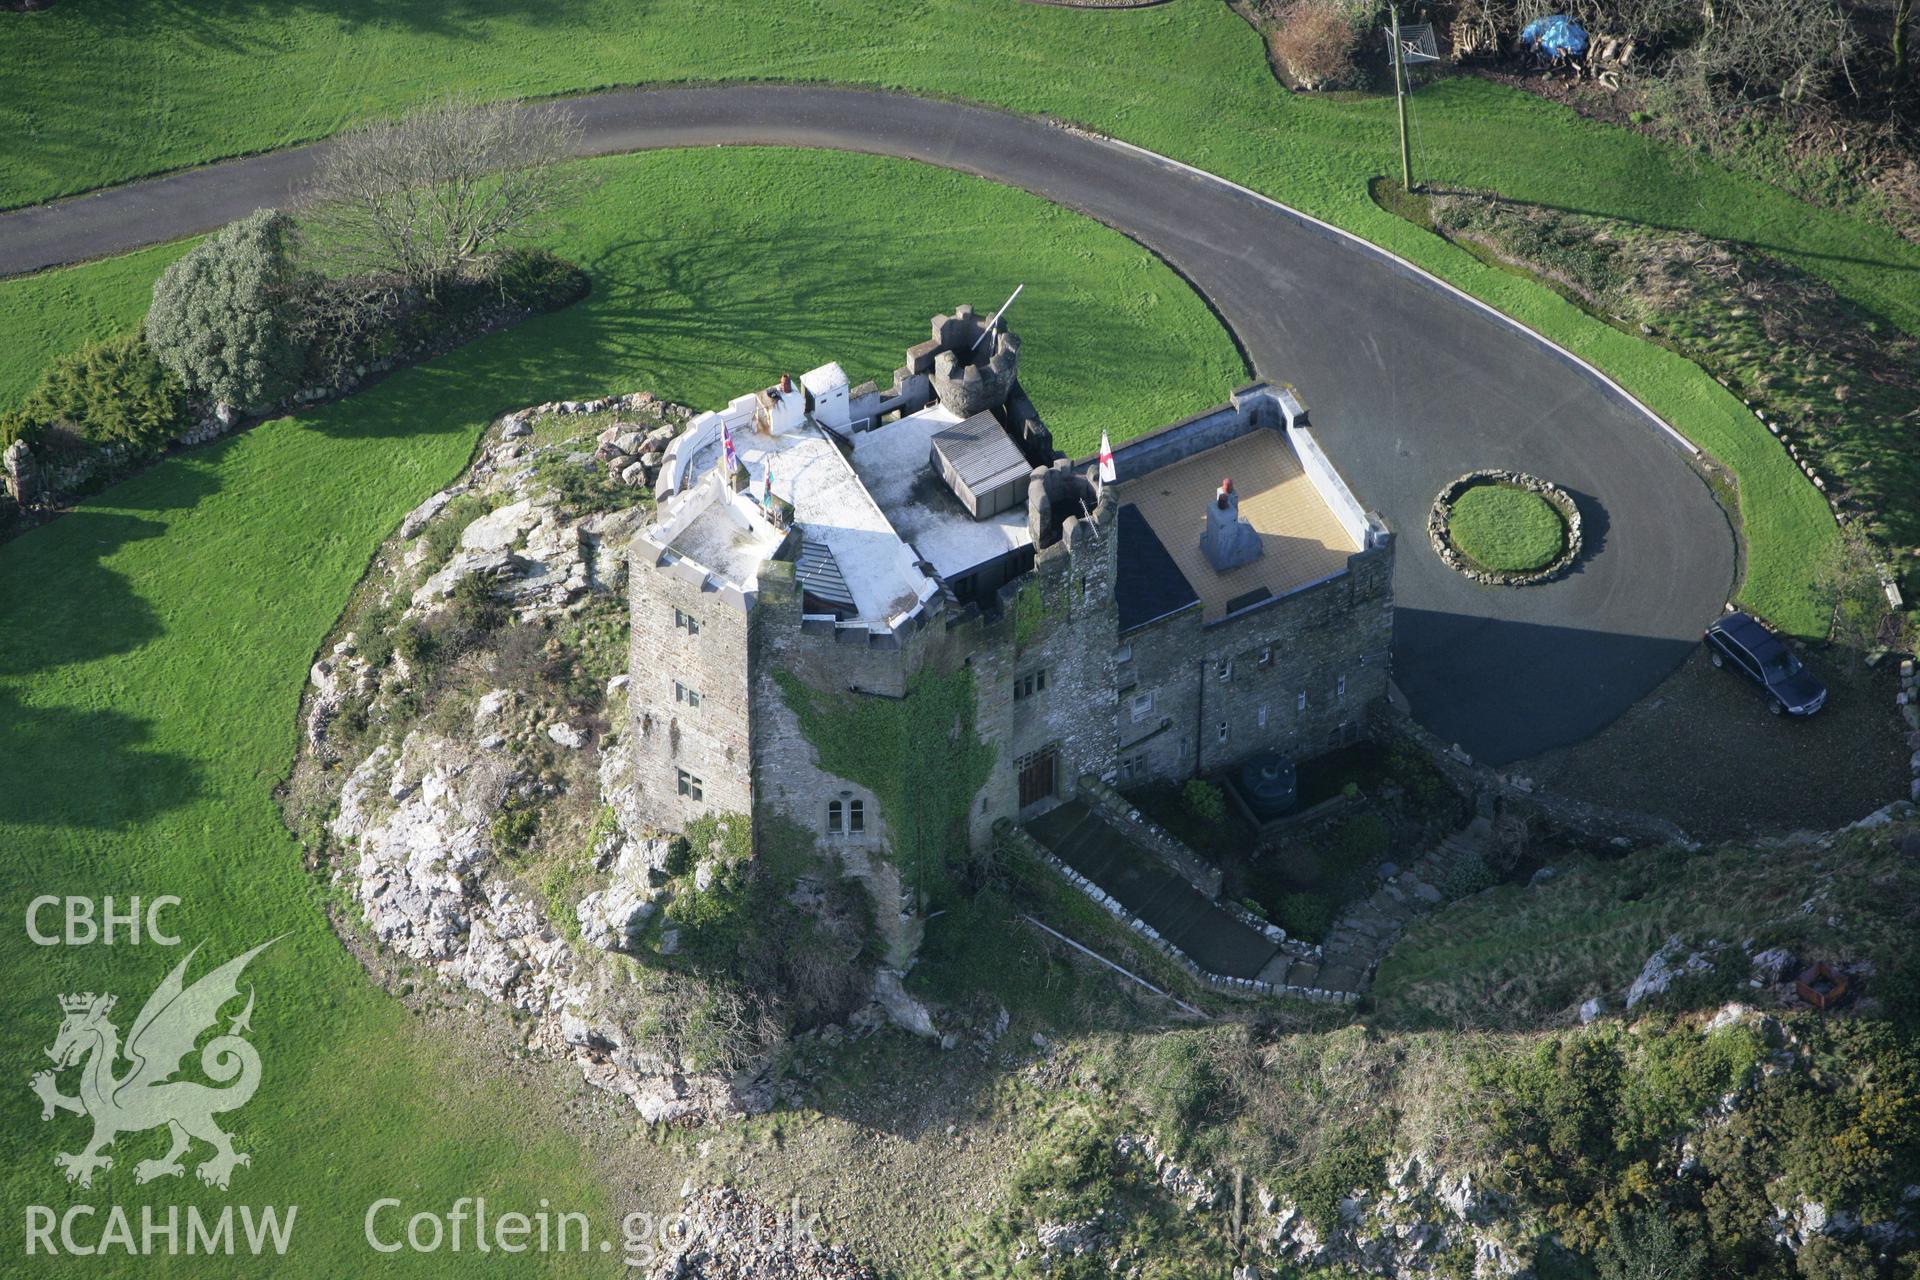 RCAHMW colour oblique aerial photograph of Roch Castle. Taken on 28 January 2009 by Toby Driver